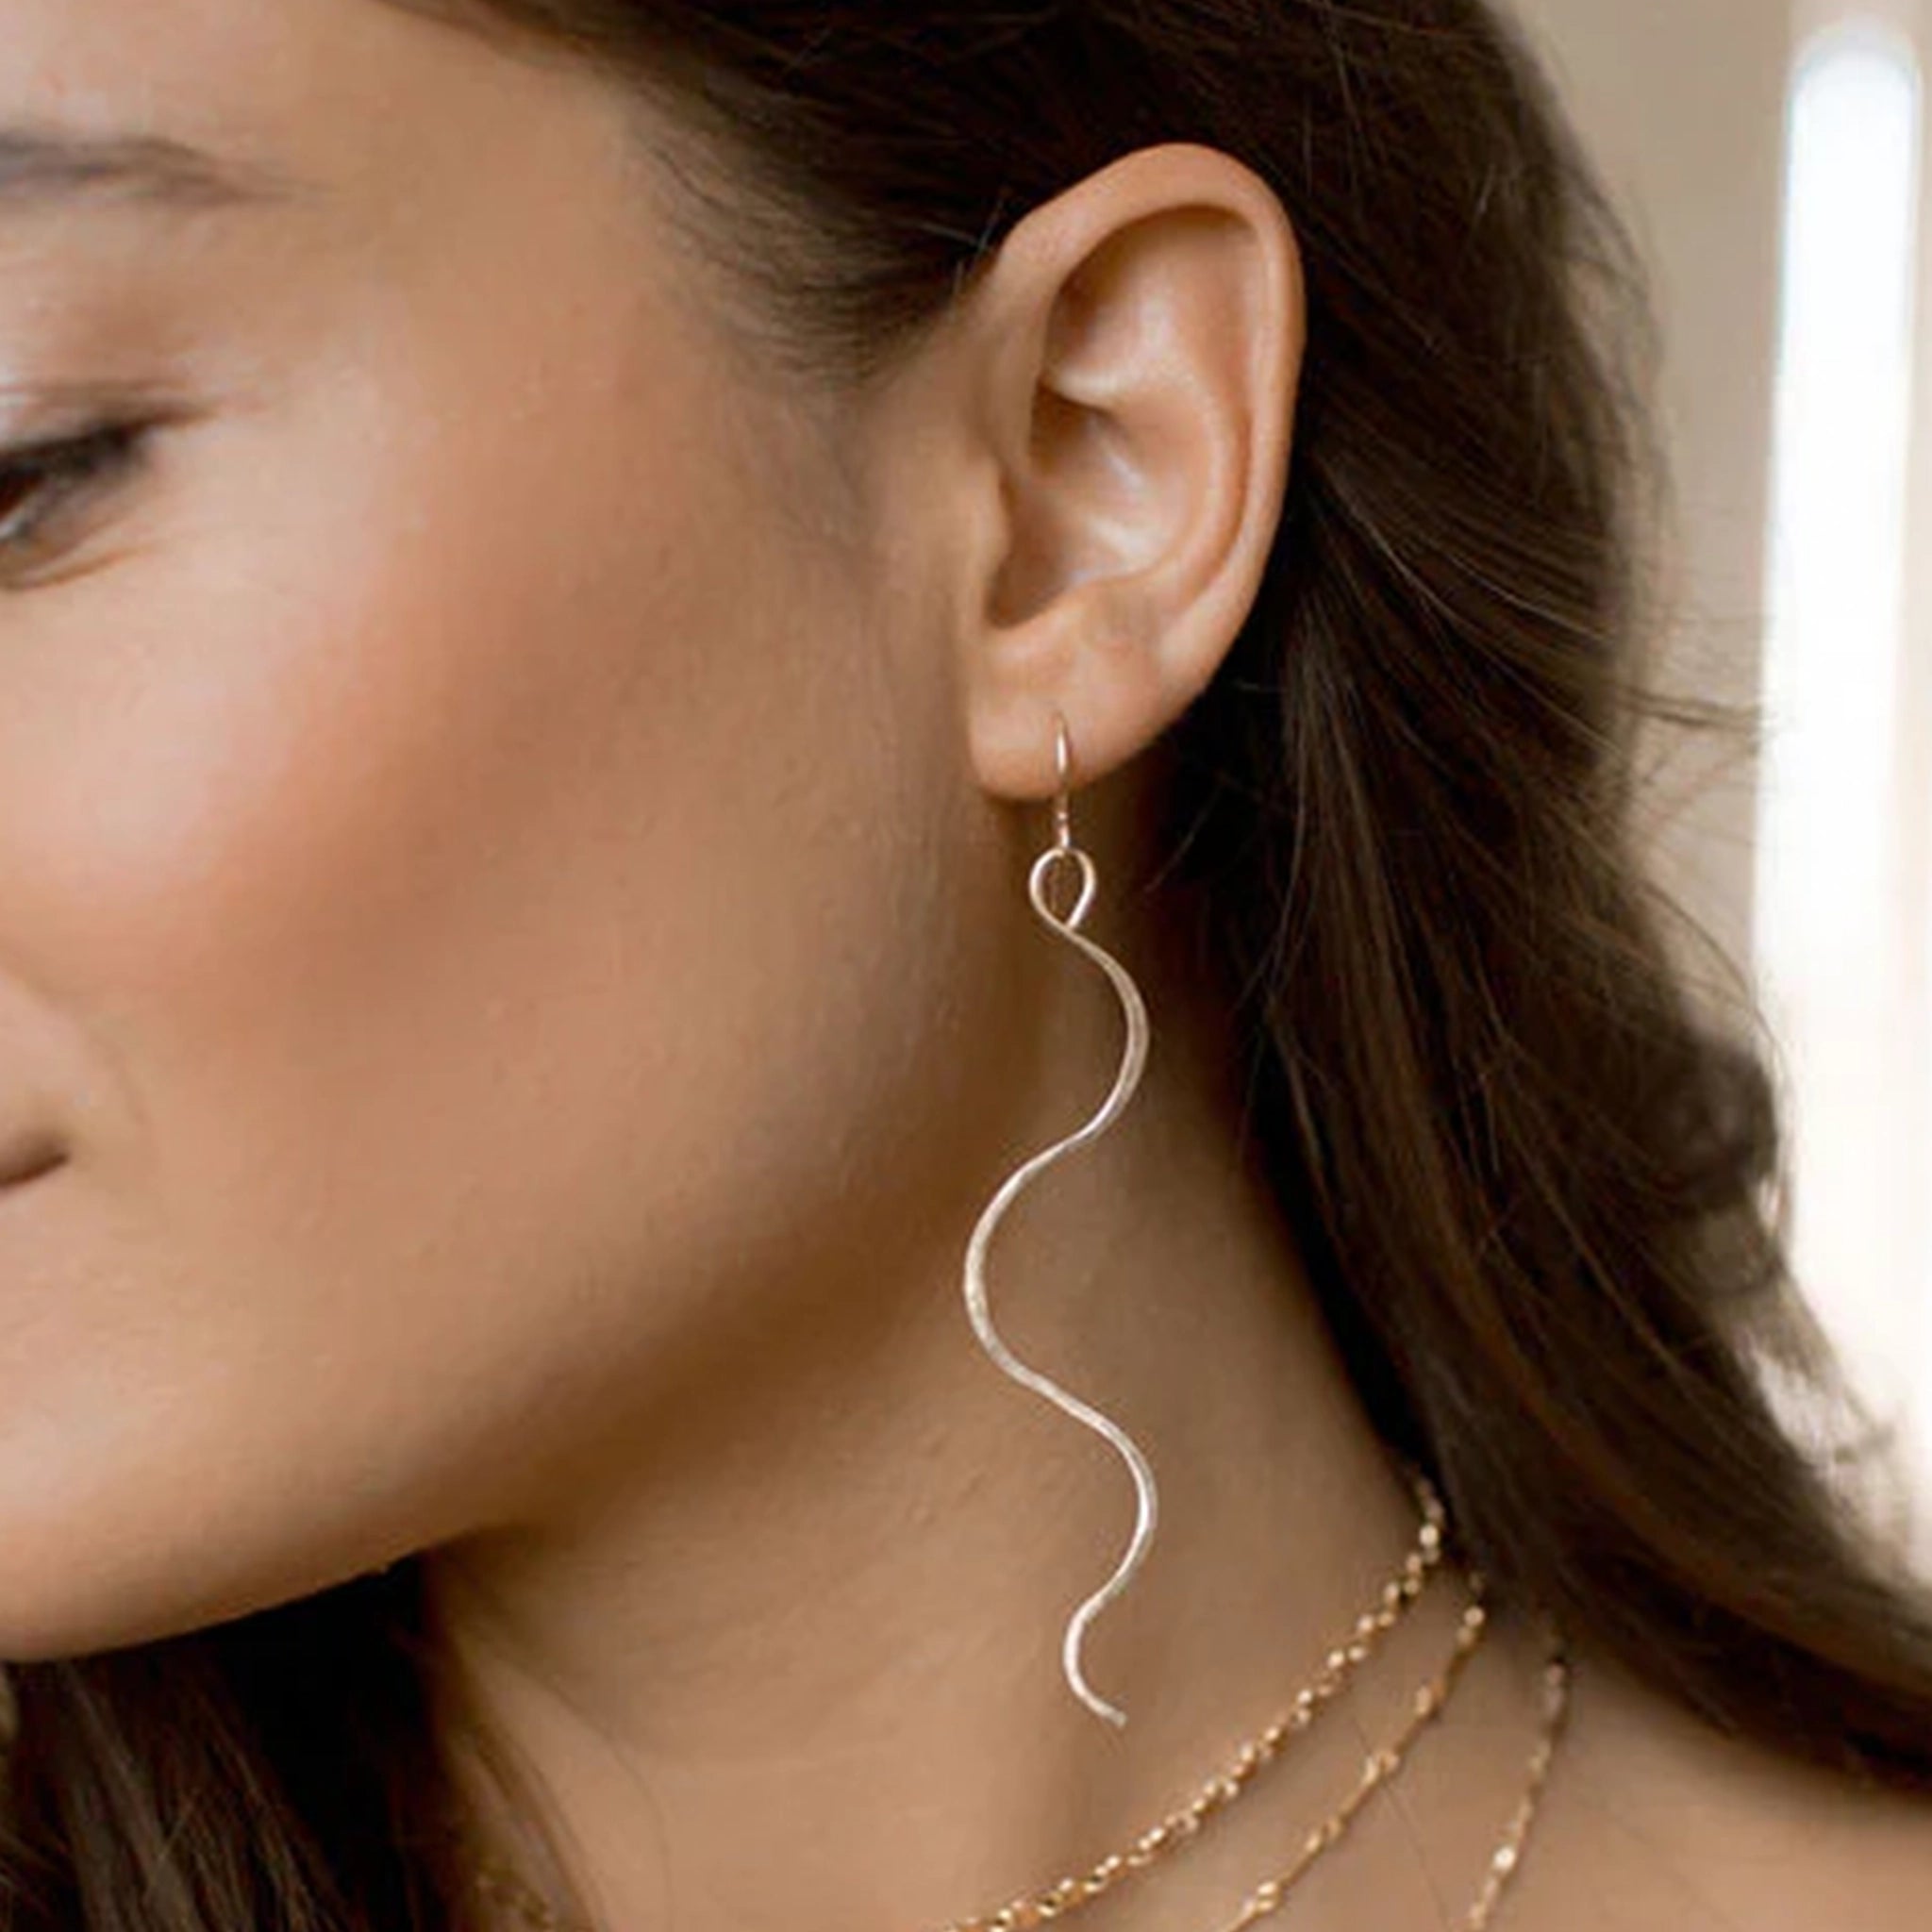 Two thin gold dangle earrings in a wavy "serpent like" shape with a hook earring back and a lightly hammered texture worn on a model and come down to about her mid neck.